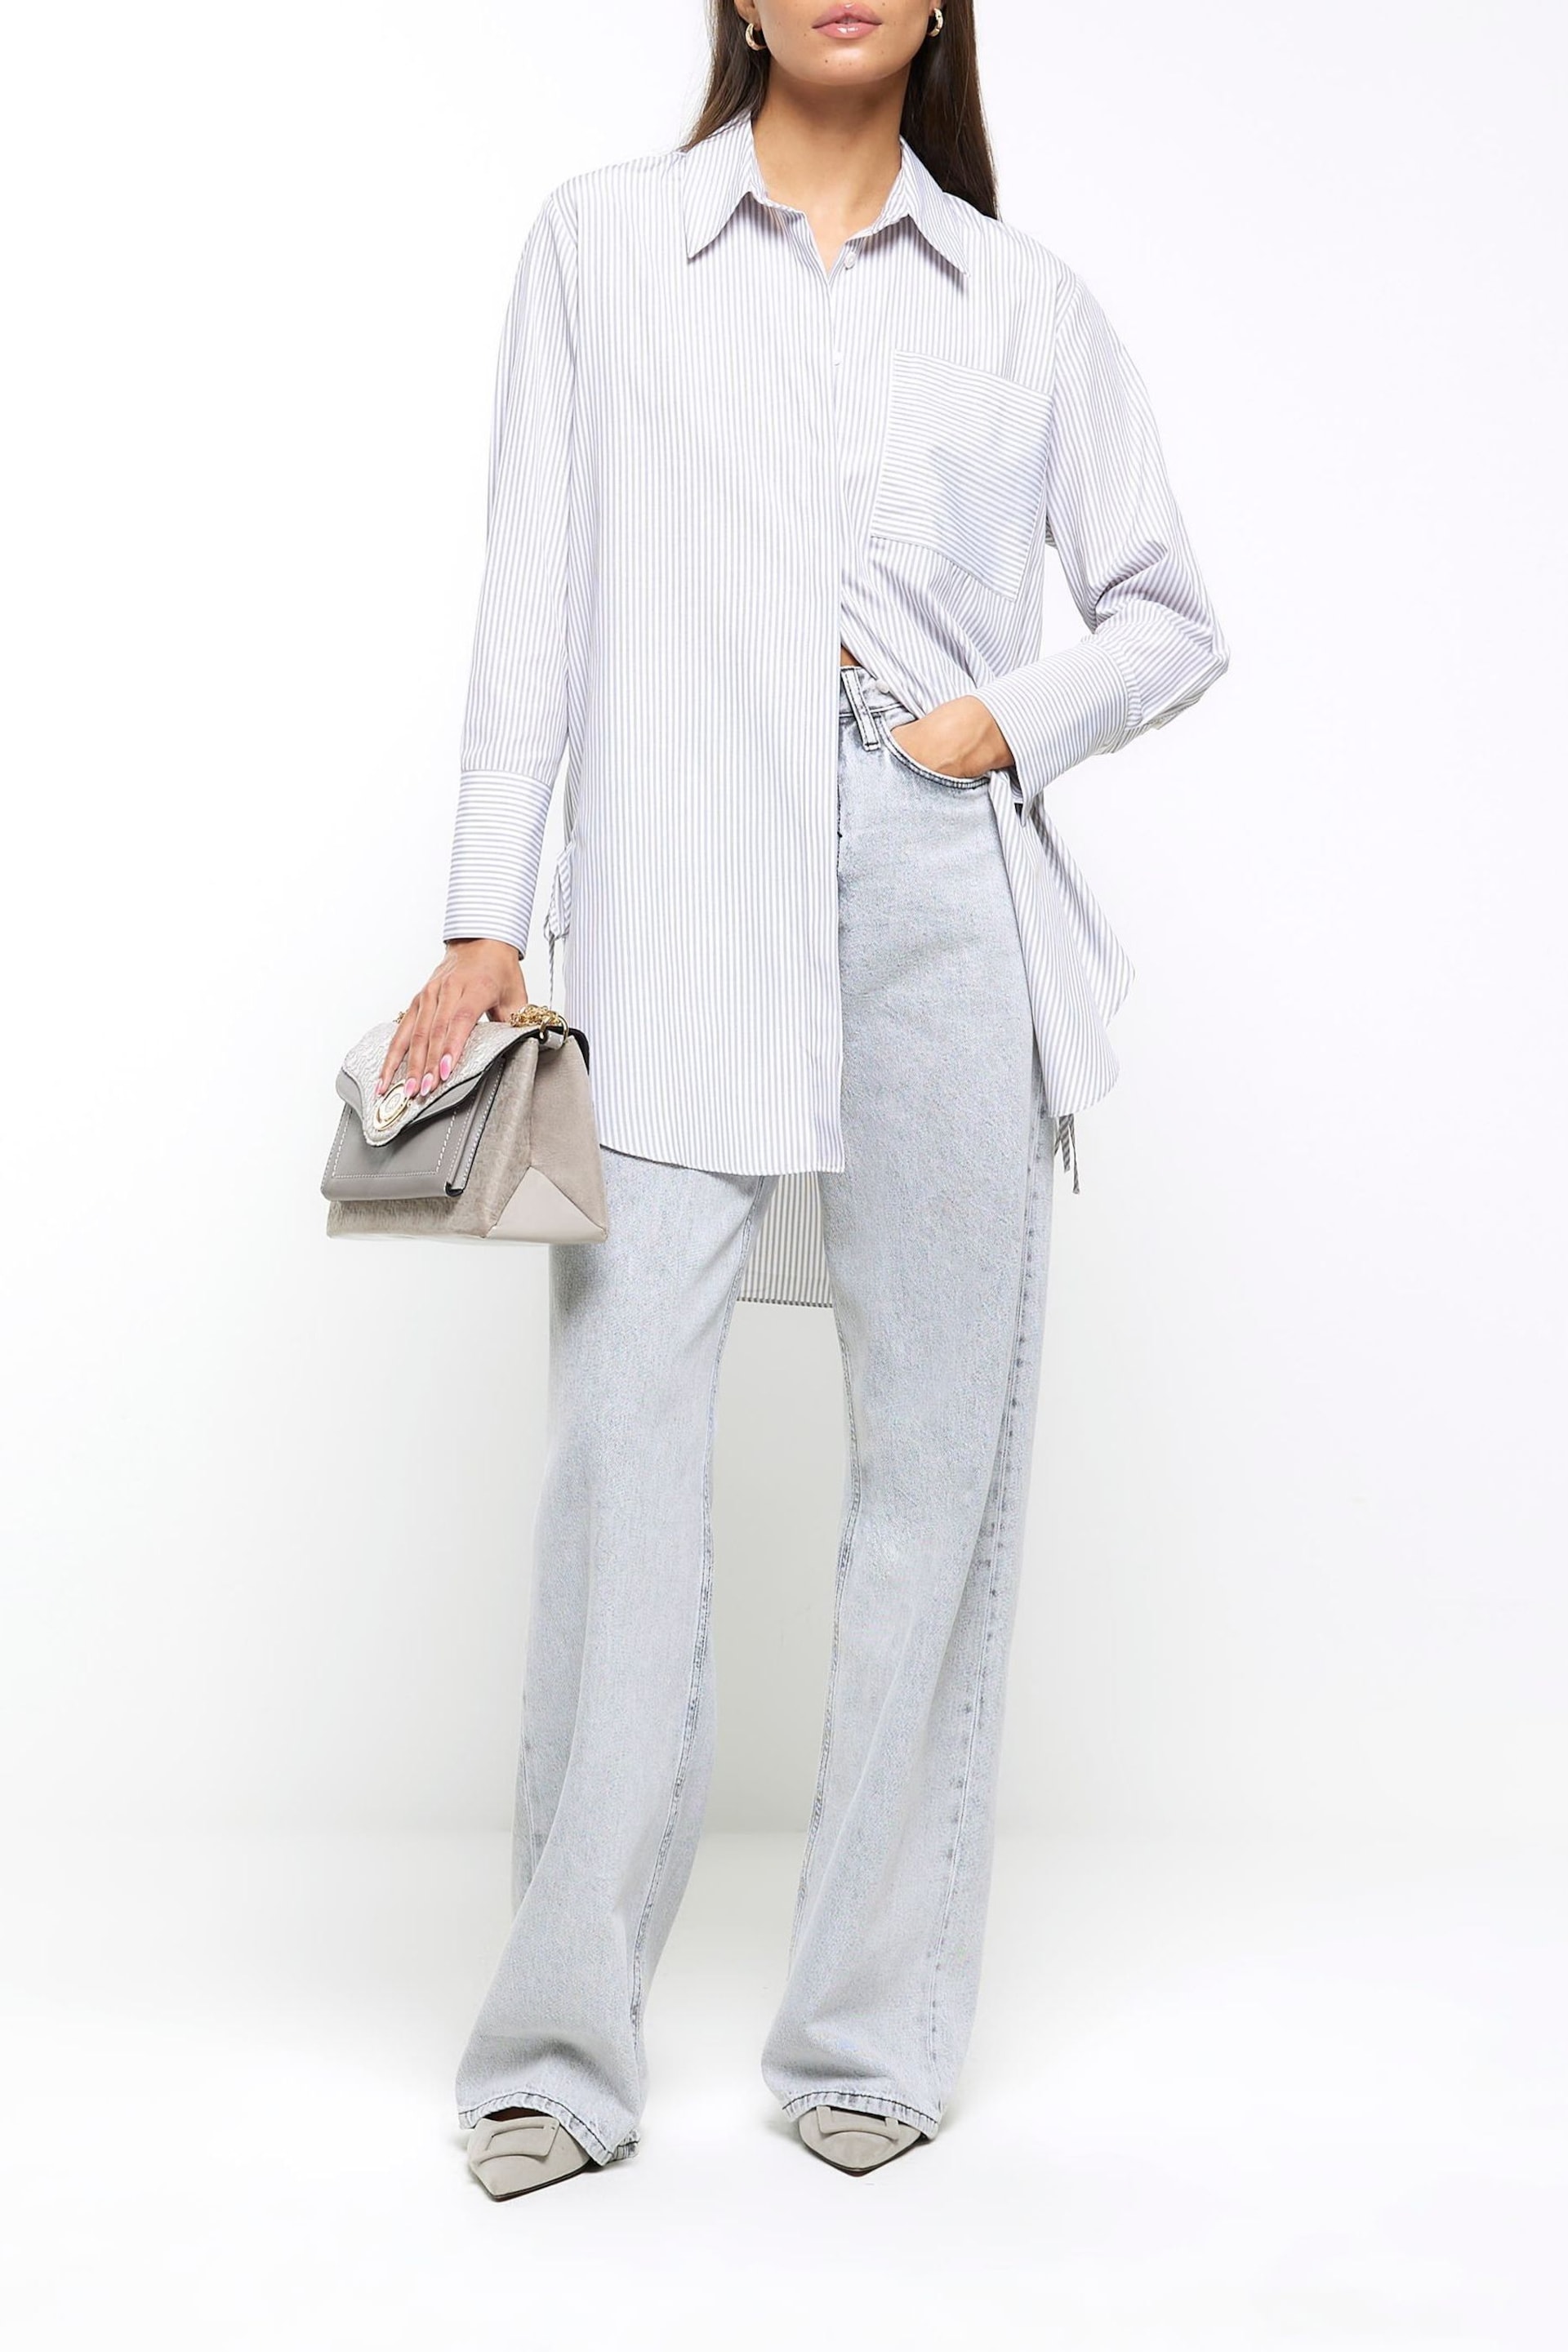 River Island Grey Tie Side Oversized Shirt - Image 4 of 6